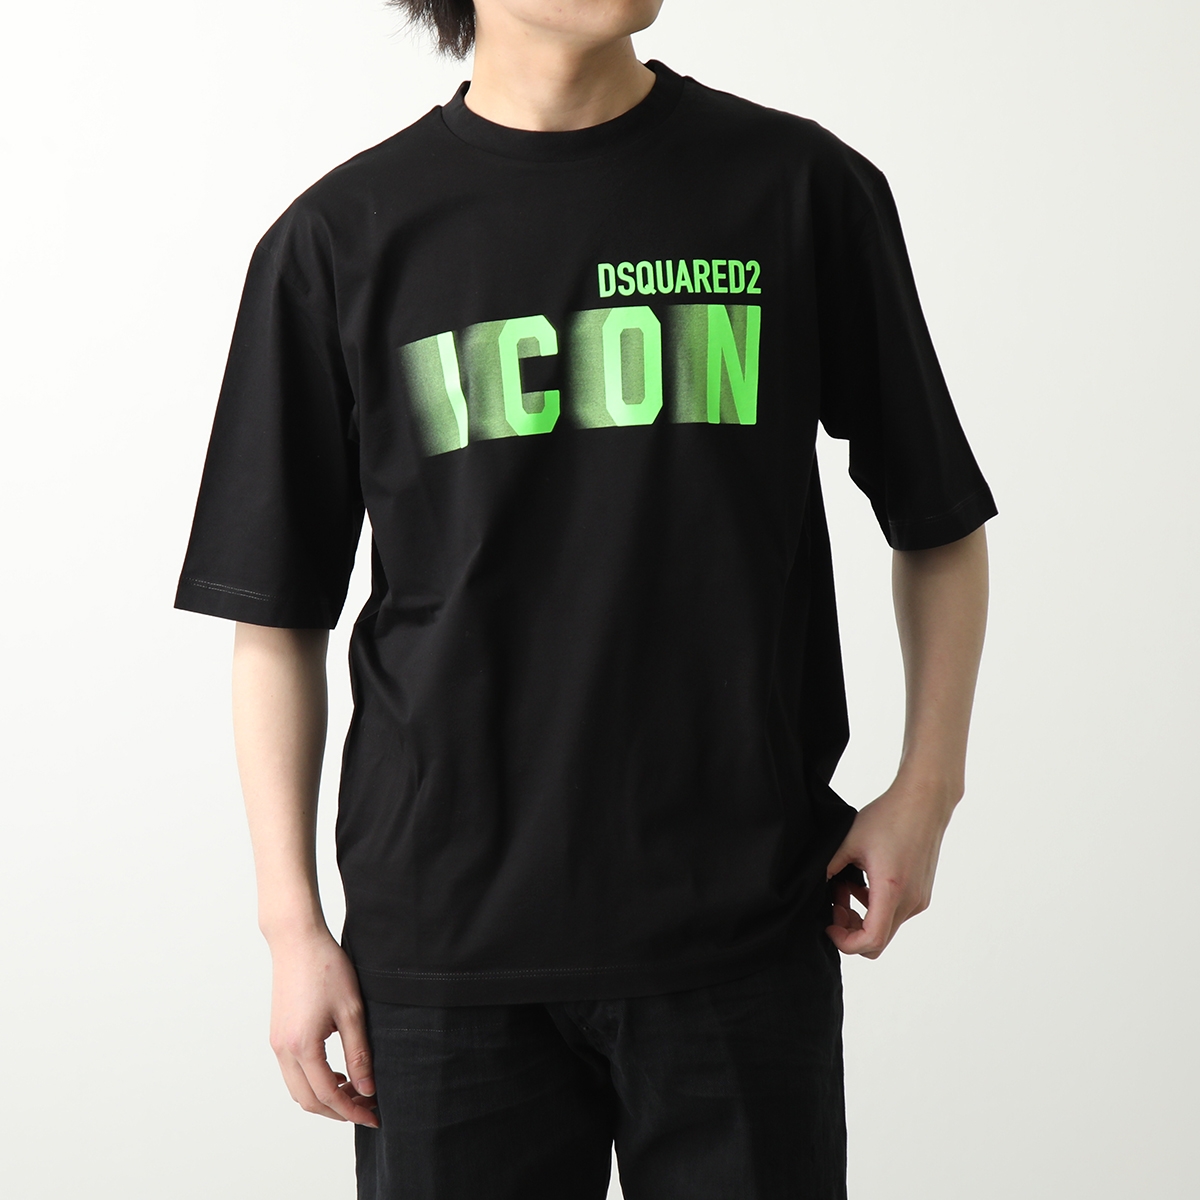 DSQUARED2 Tシャツ ICON BLUR LOOSE FIT TEE S79GC0081 S...